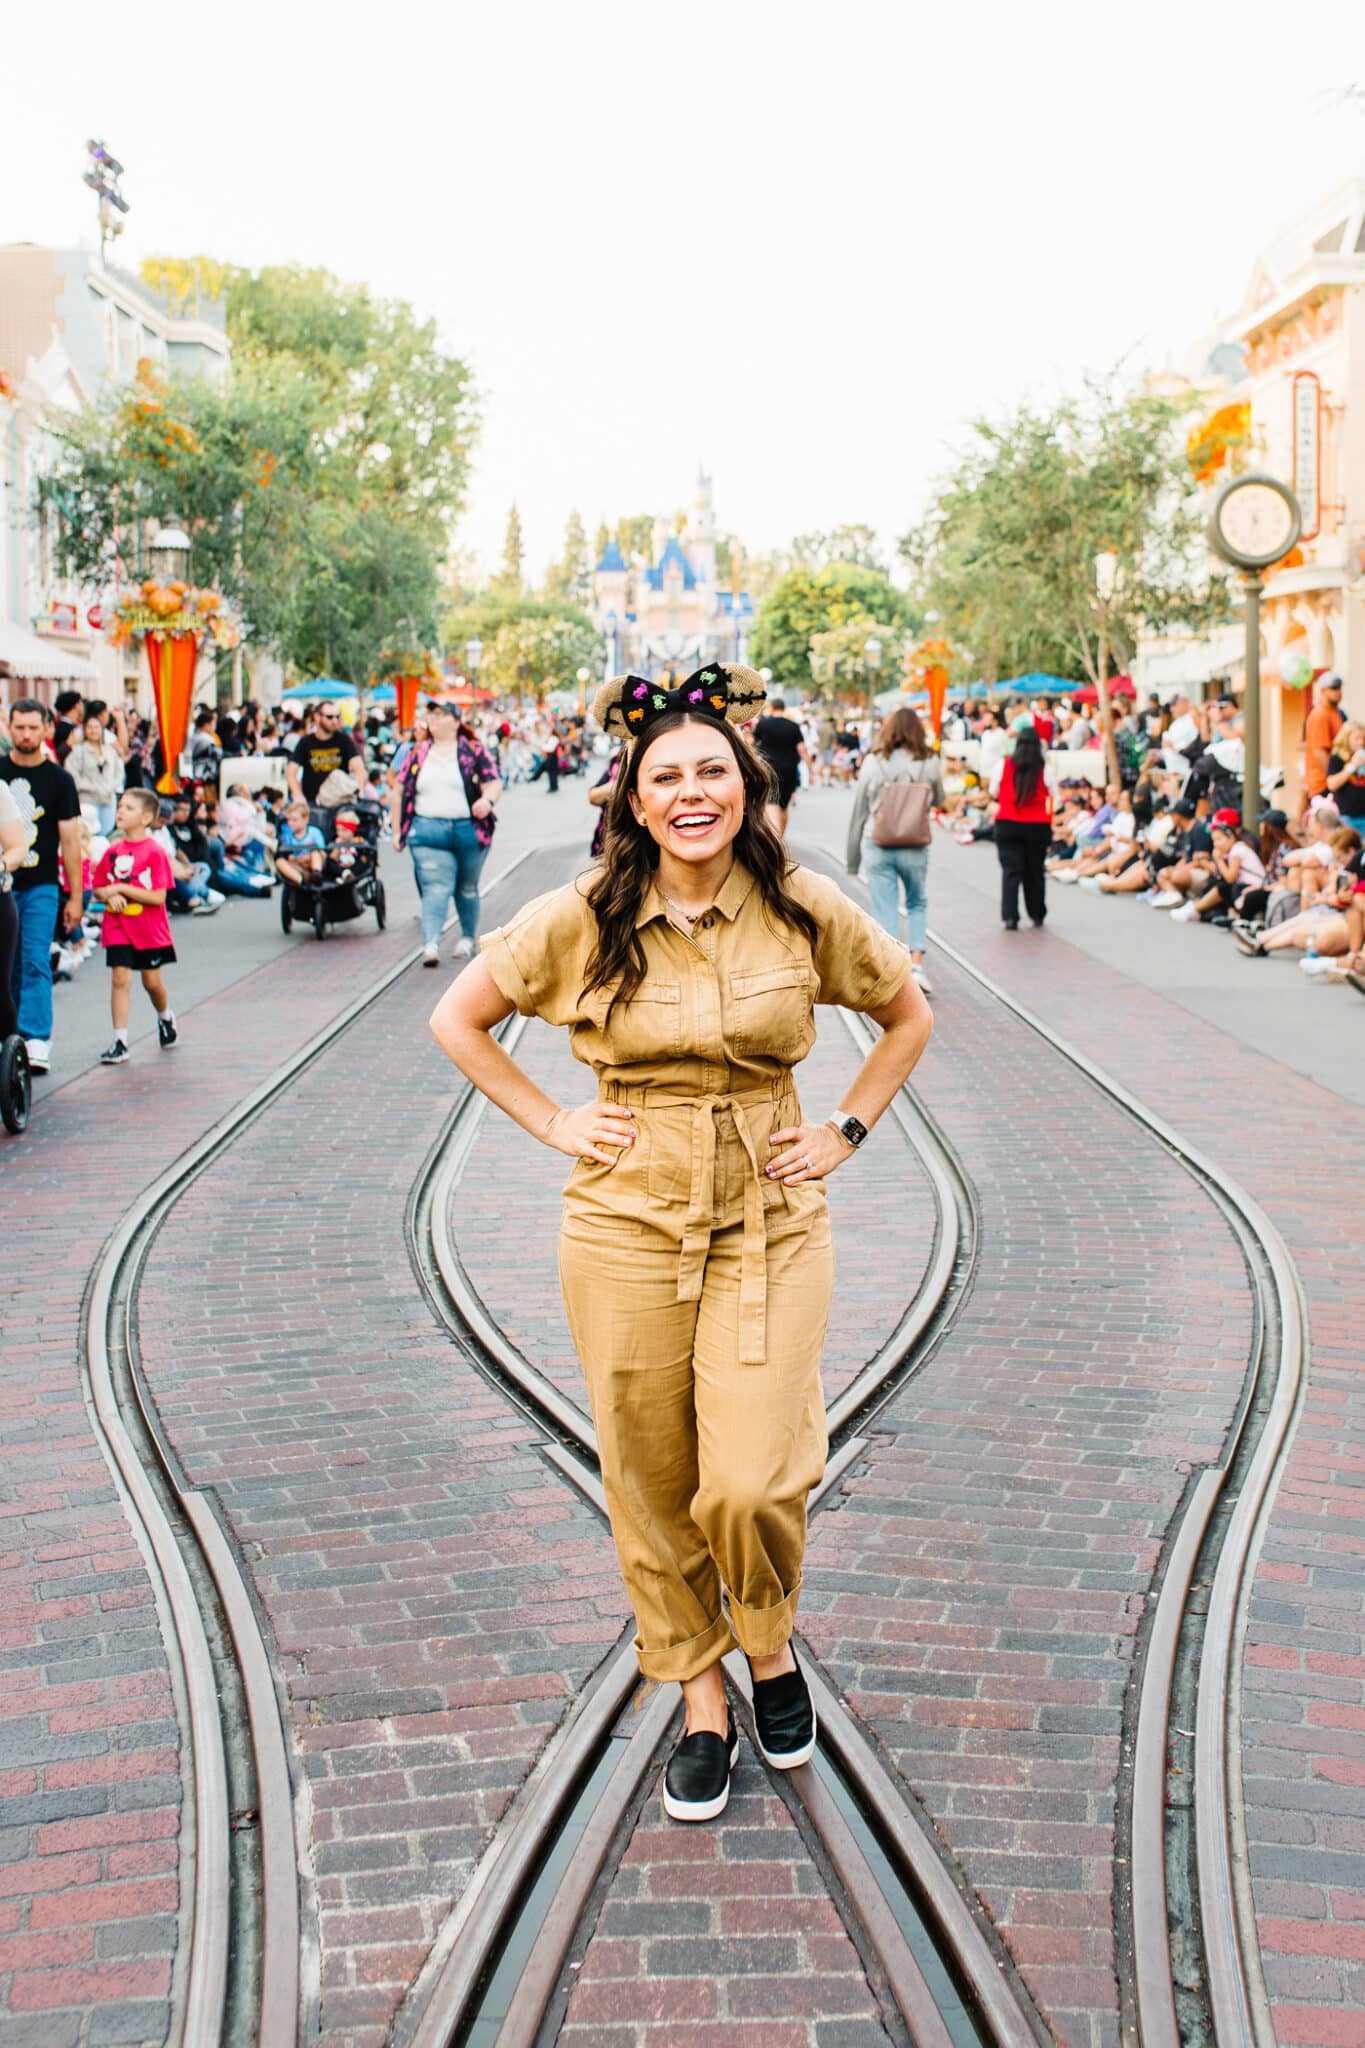 Disney bound outfit example woman wearing an Oogie Boogie Disney bound outfit. 